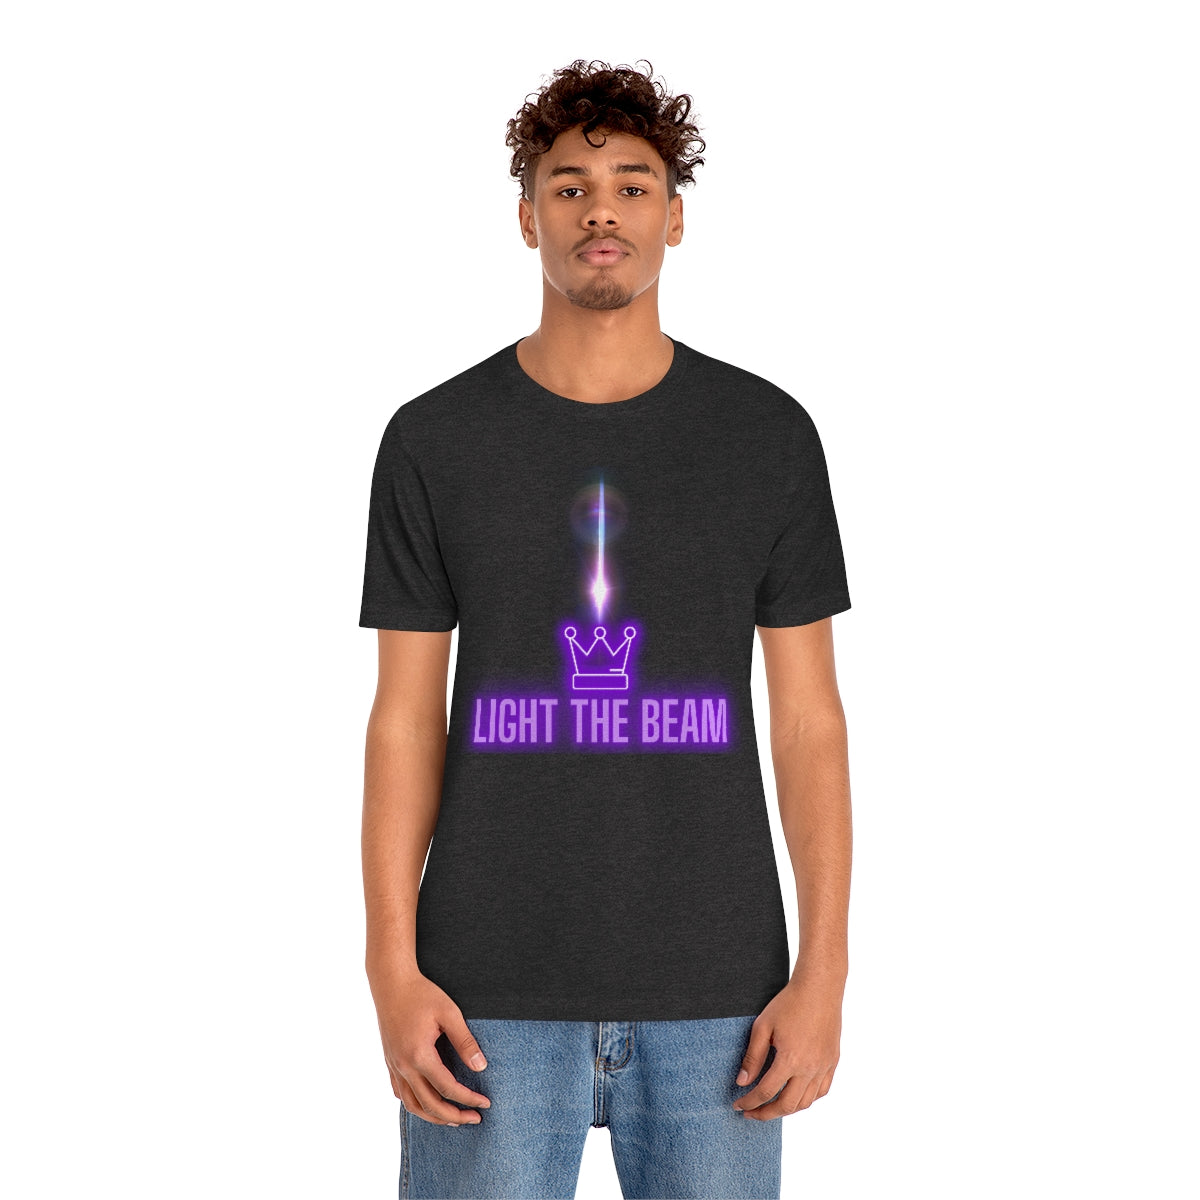 Light the Beam, Sacramento Basketball, Unisex Short Sleeve Tee, Kings Basketball,Light the Beam! This Kings Basketball T-shirt is the perfect way to celebrate another W - WIN - for your Sacramento Basketball team in this comfortable, cool shirt. Perfect to sport at the game or show-off the day after another W. It's going to be an epic season for our Kings team - show off your Sac-Town pride.